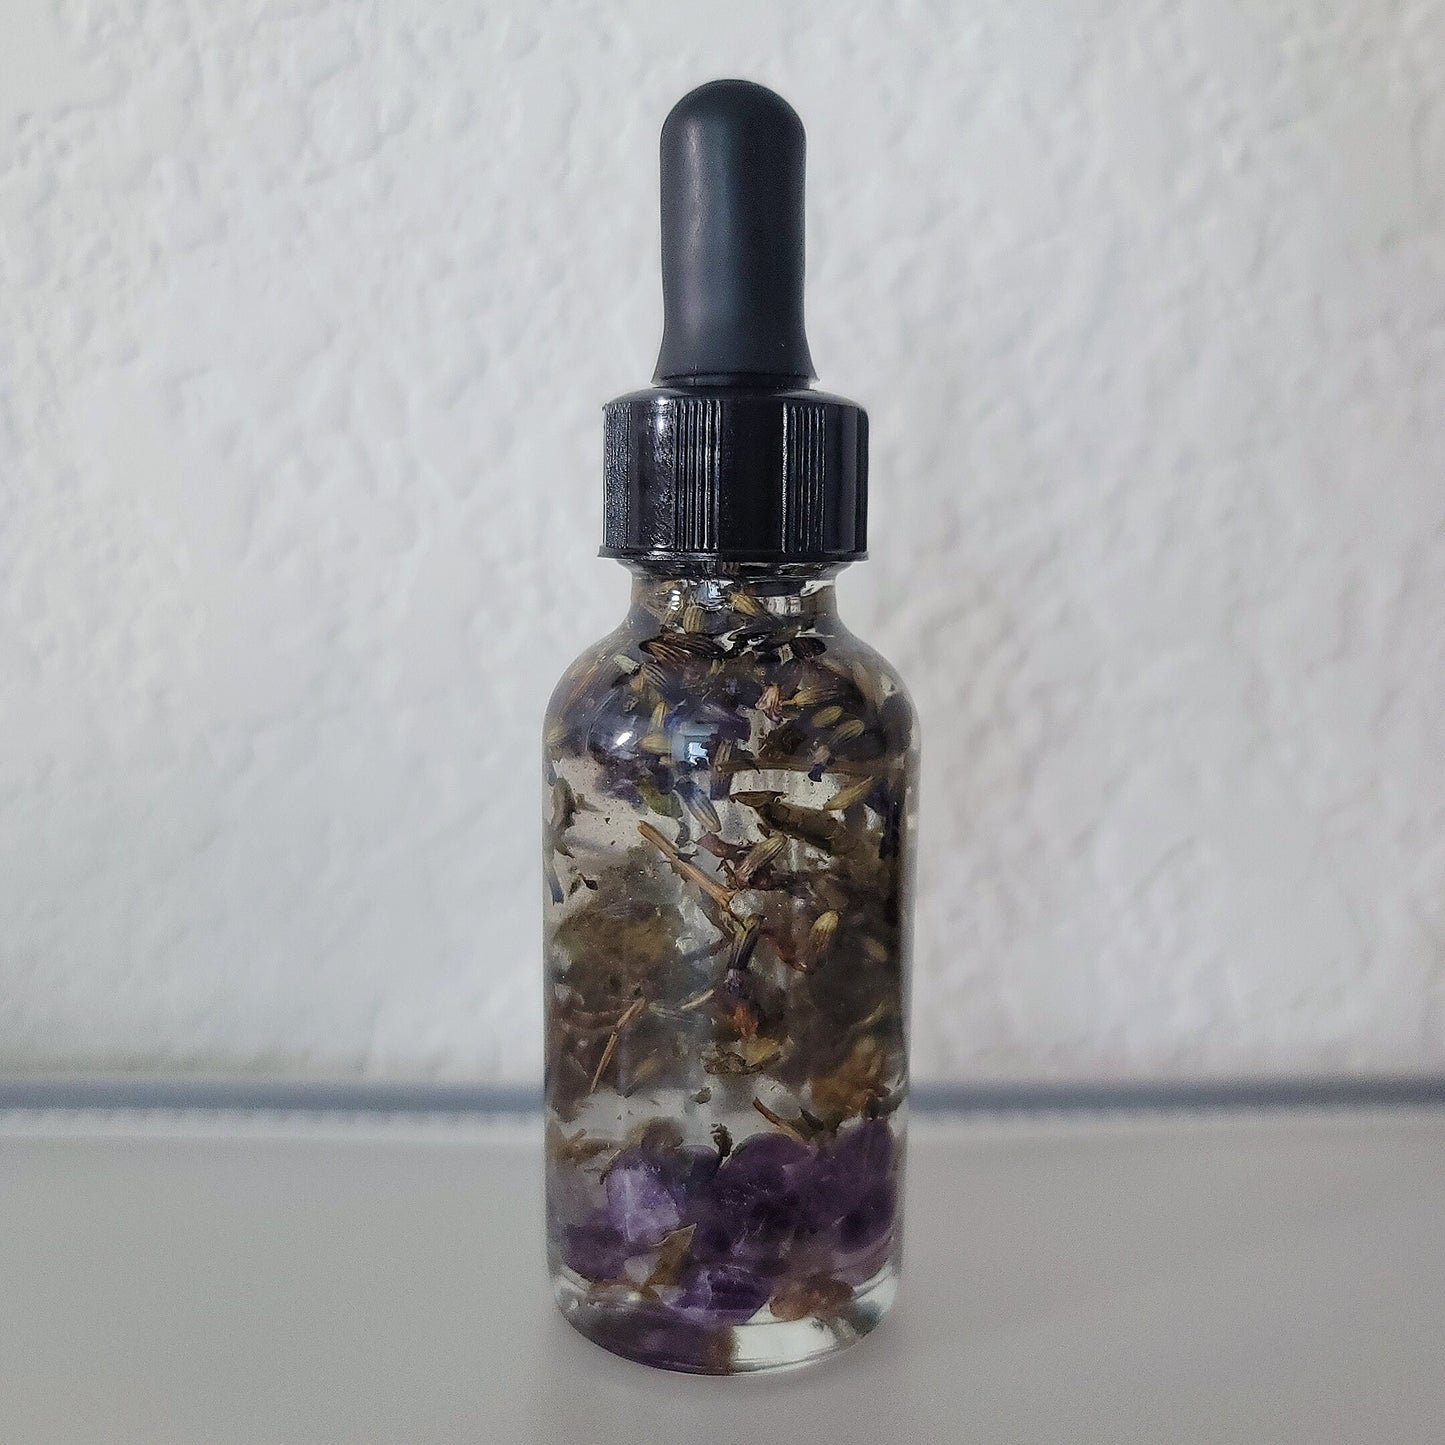 Hypnos God Oil | Ritual & Spell Work, Altars, Invocation, Manifestation, and Intentions